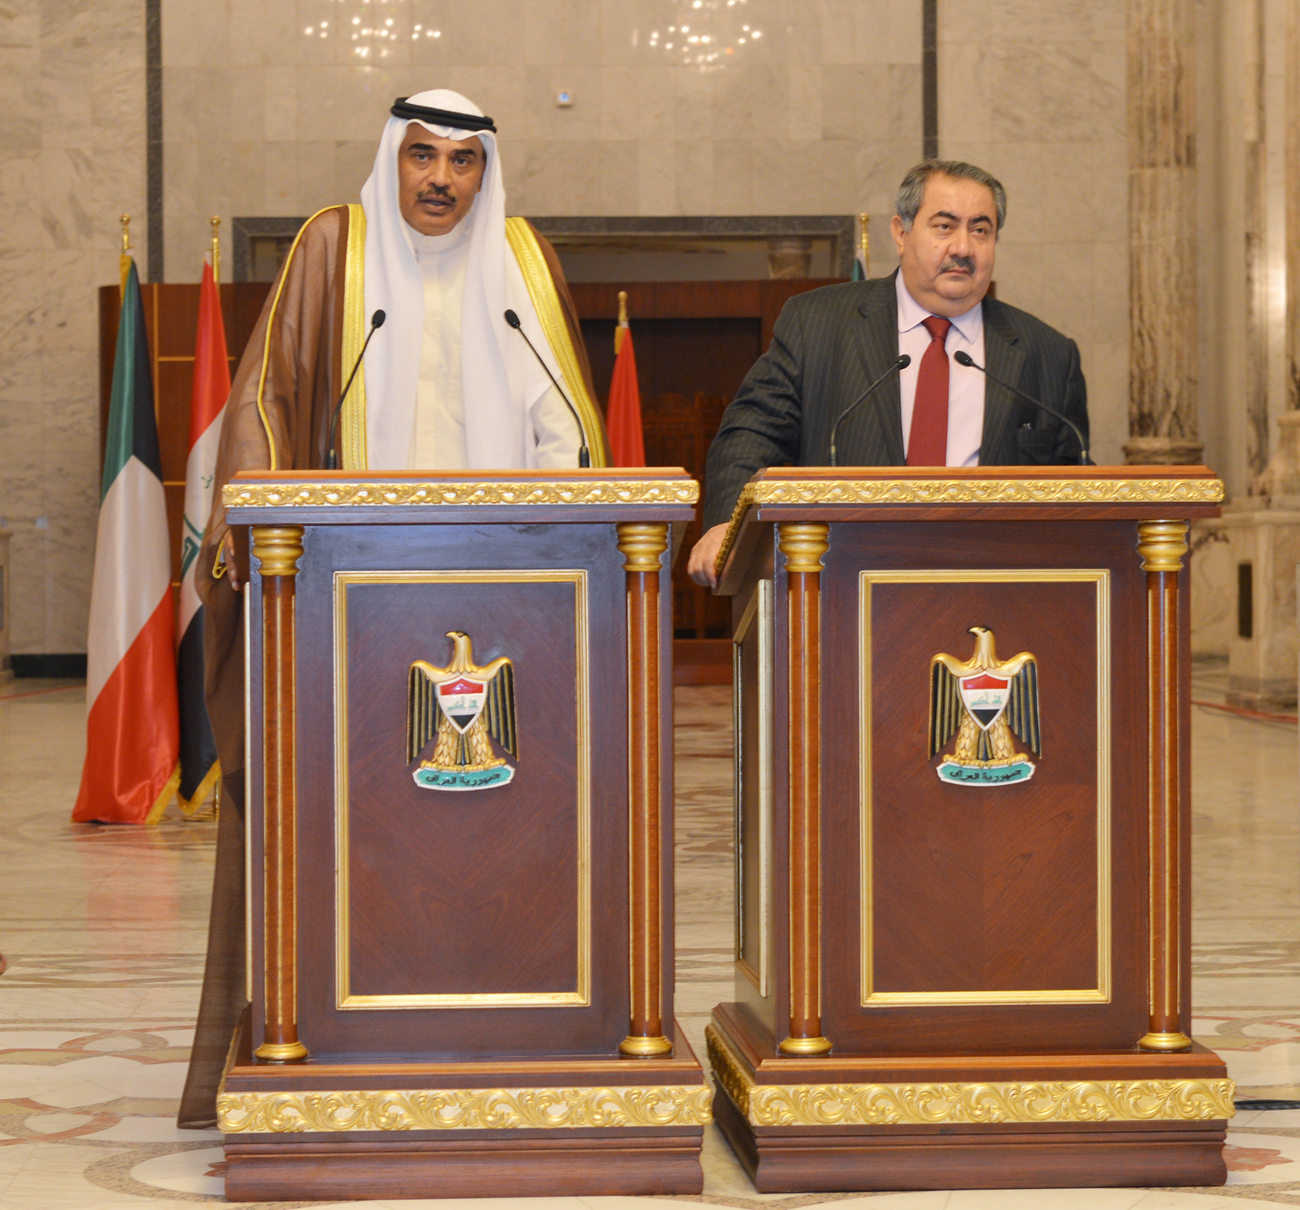 Kuwaiti Deputy Prime Minister and Foreign Minister Sheikh Sabah Al-Khaled Al-Hamad Al-Sabah in the joint press conference with Iraqi Foreign Minister Hoshyar Zebari